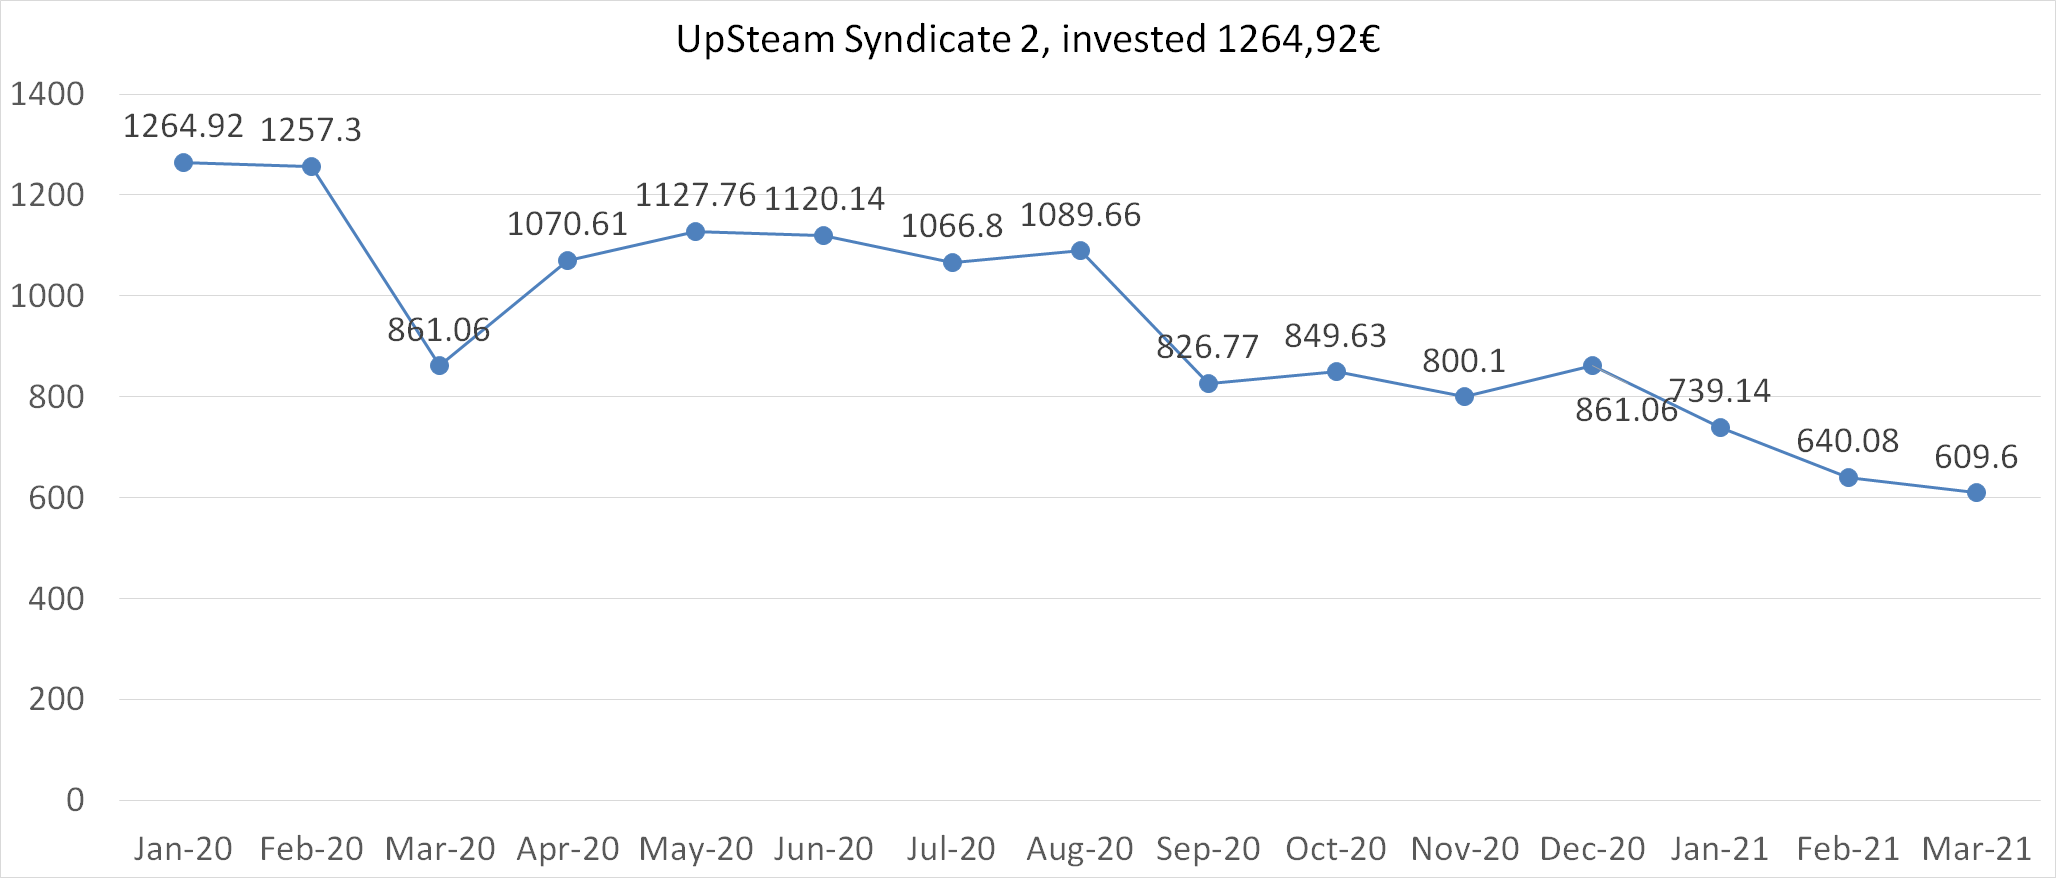 UpSteam syndicate 2 worth March 2021